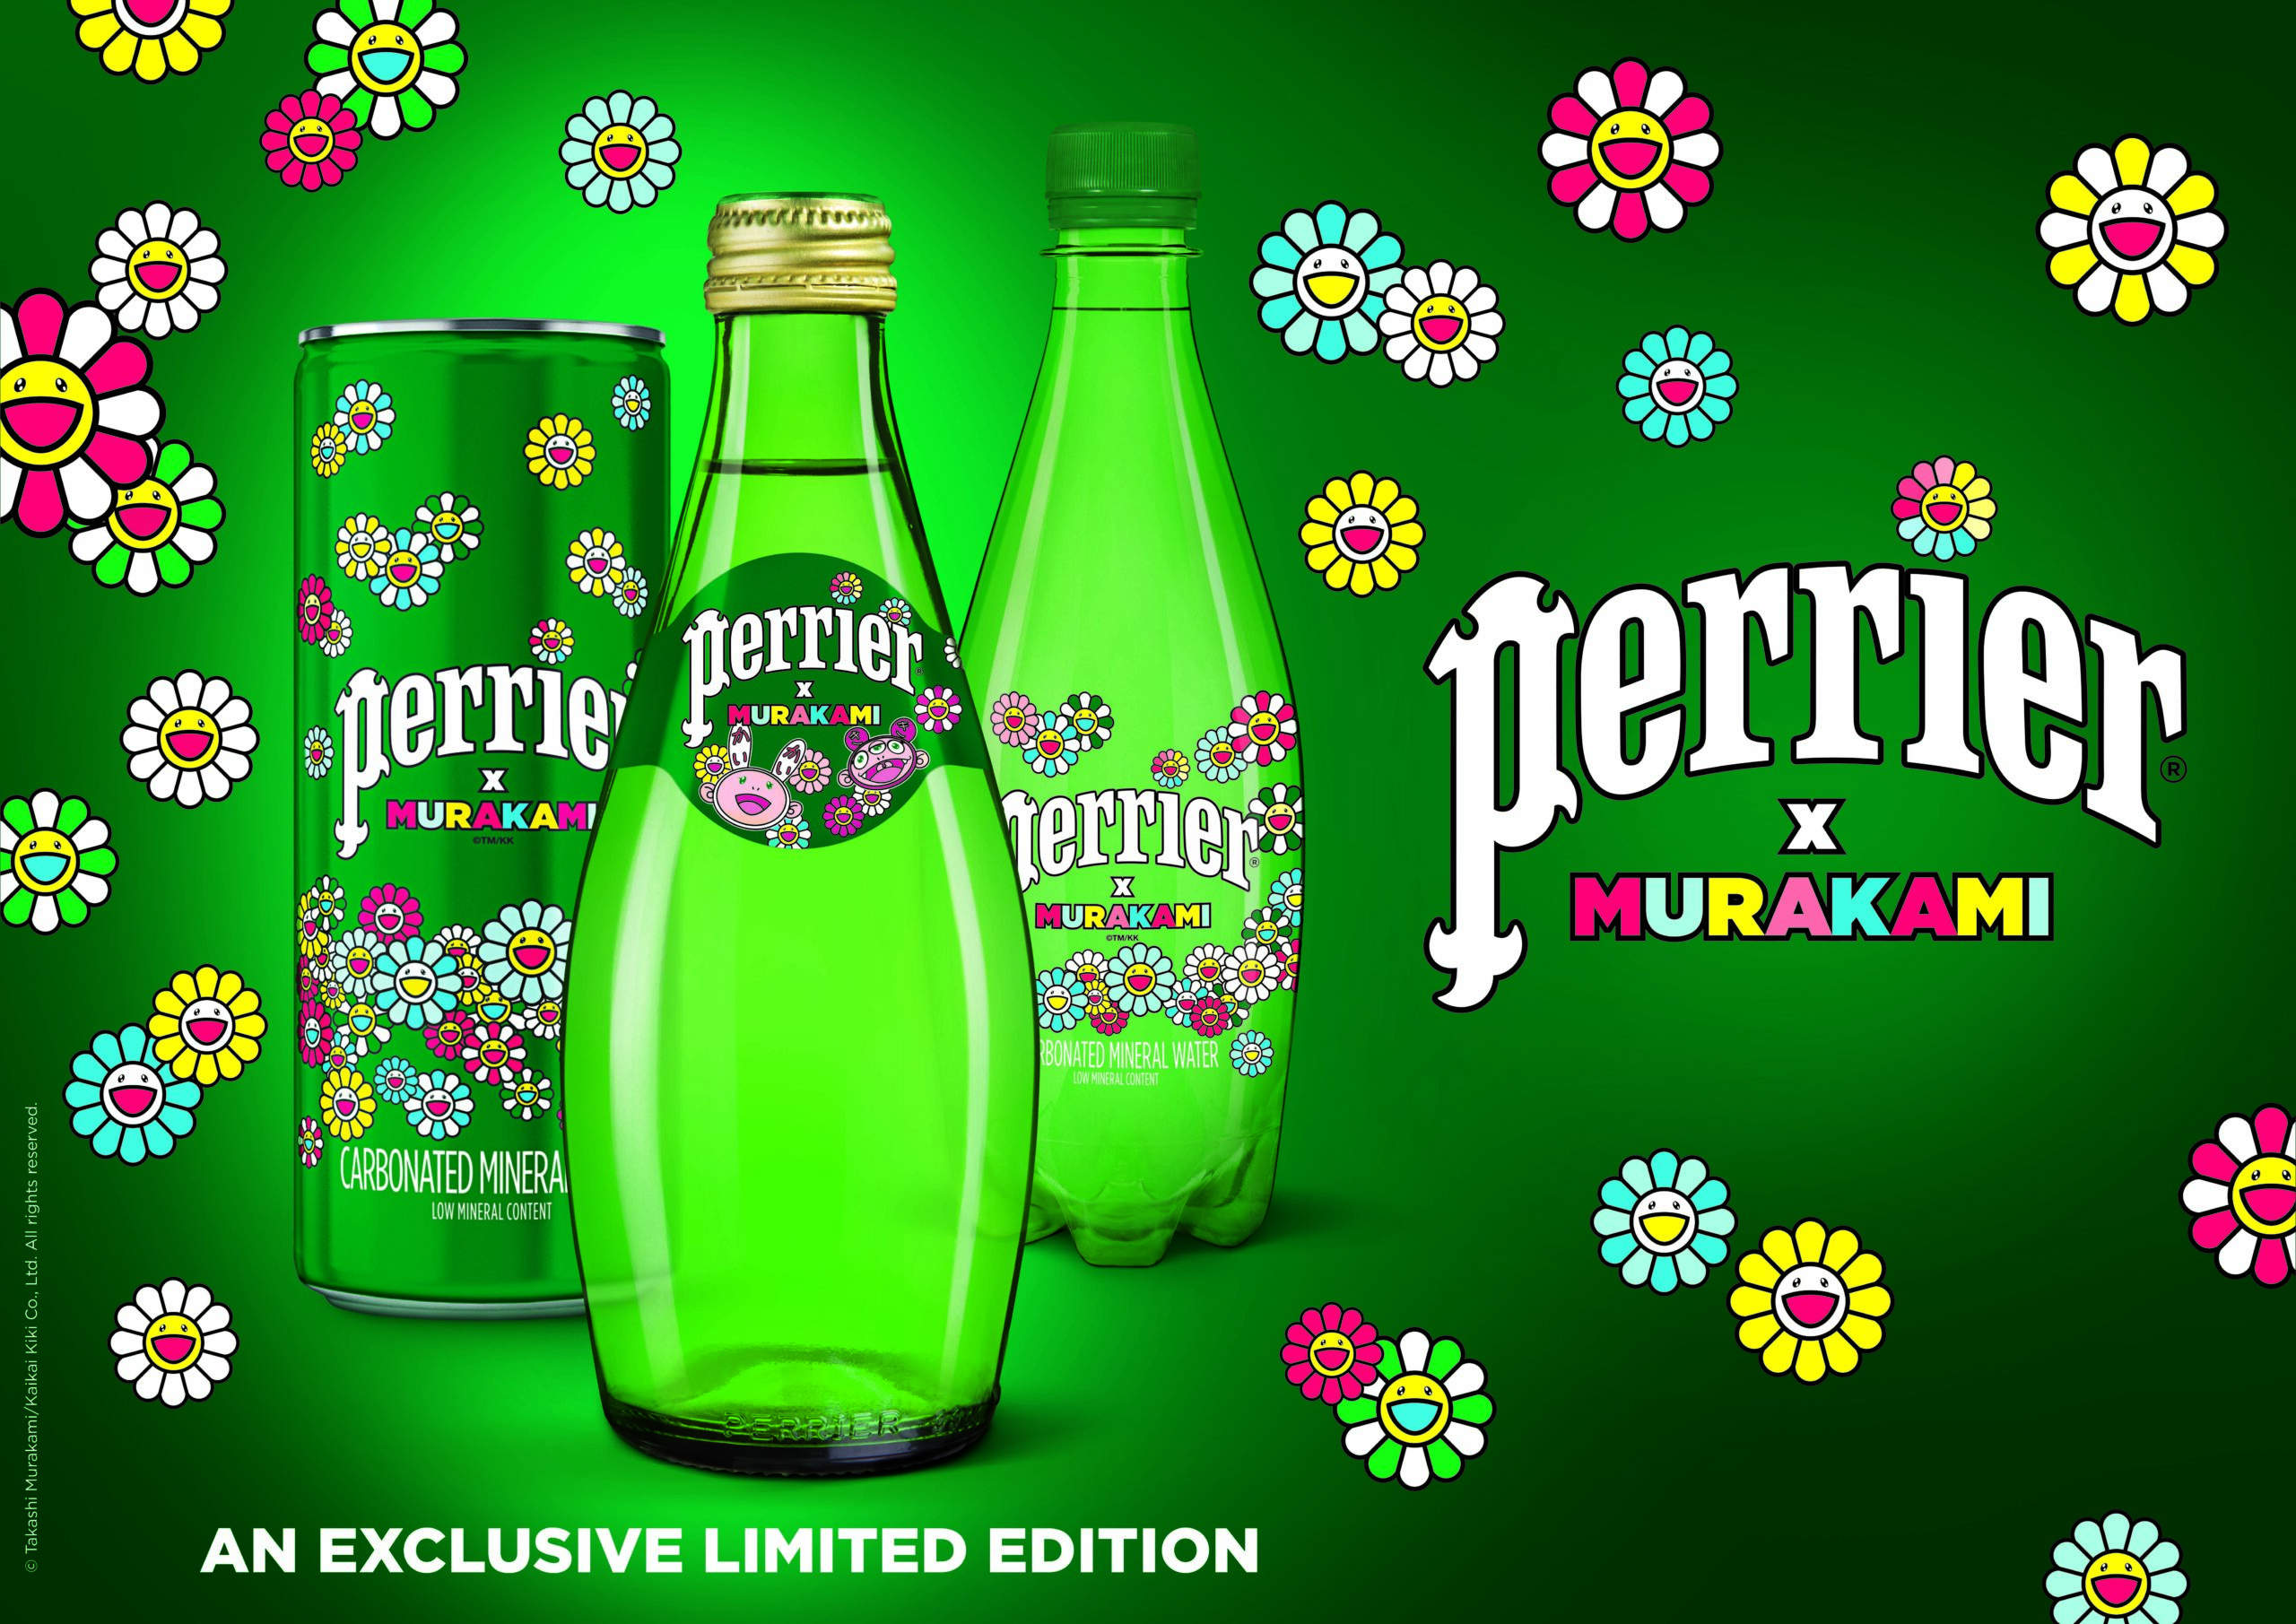 Collection Murakami X Perrier
